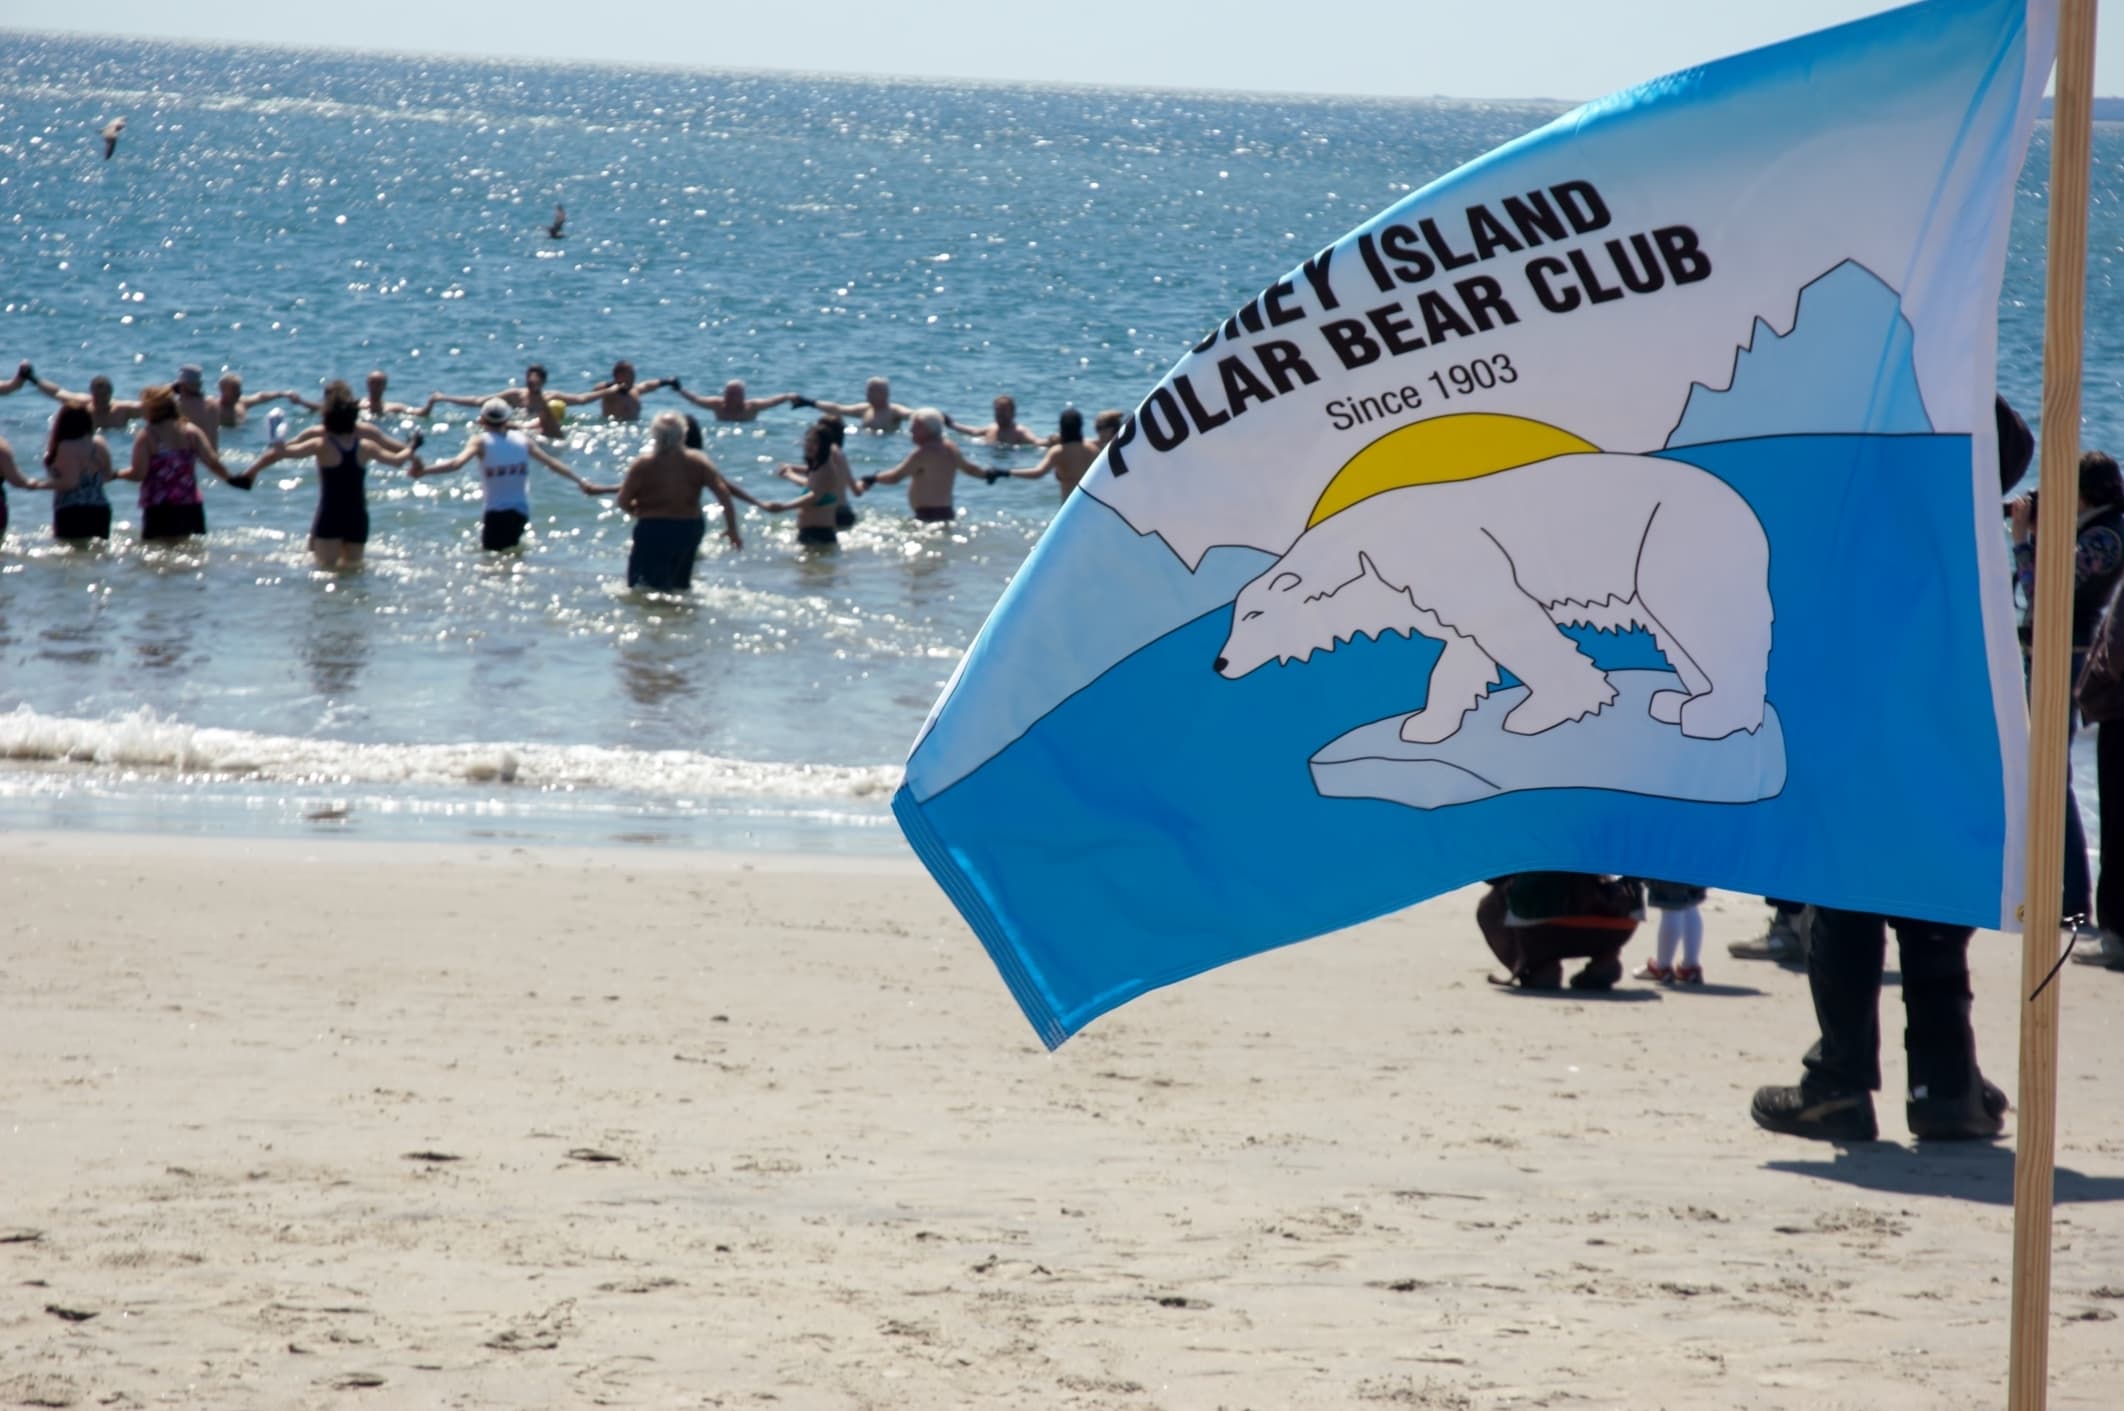 Polar Bear Club Swimmers on New Year's Day in Coney island